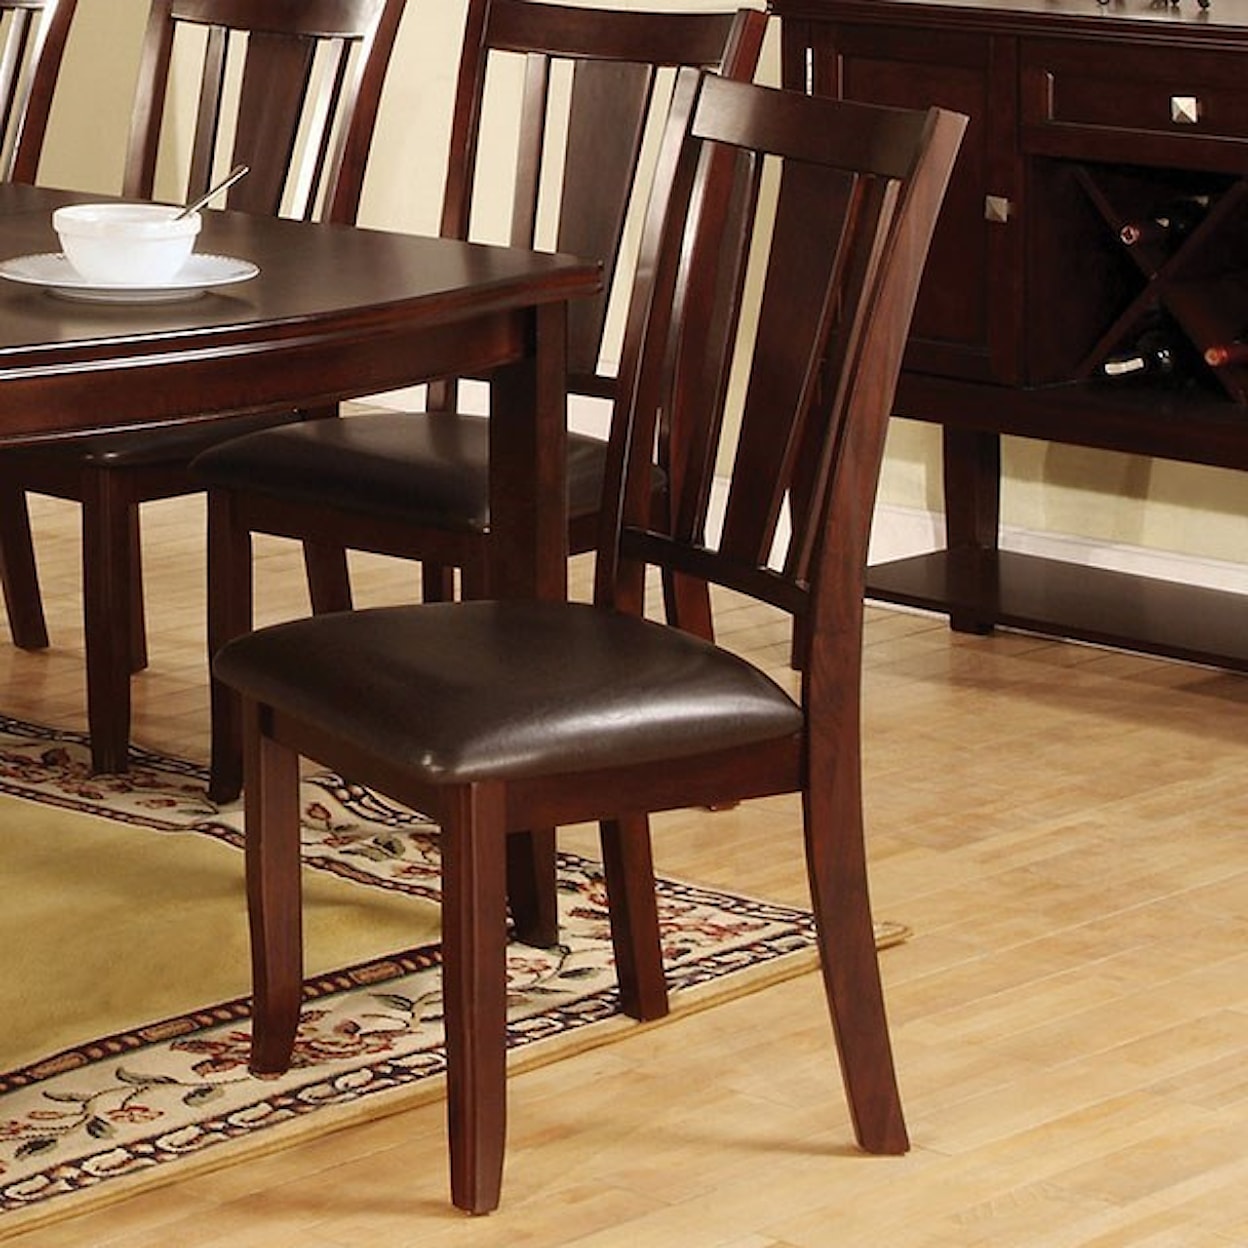 FUSA Edgewood Set of Two Side Chairs